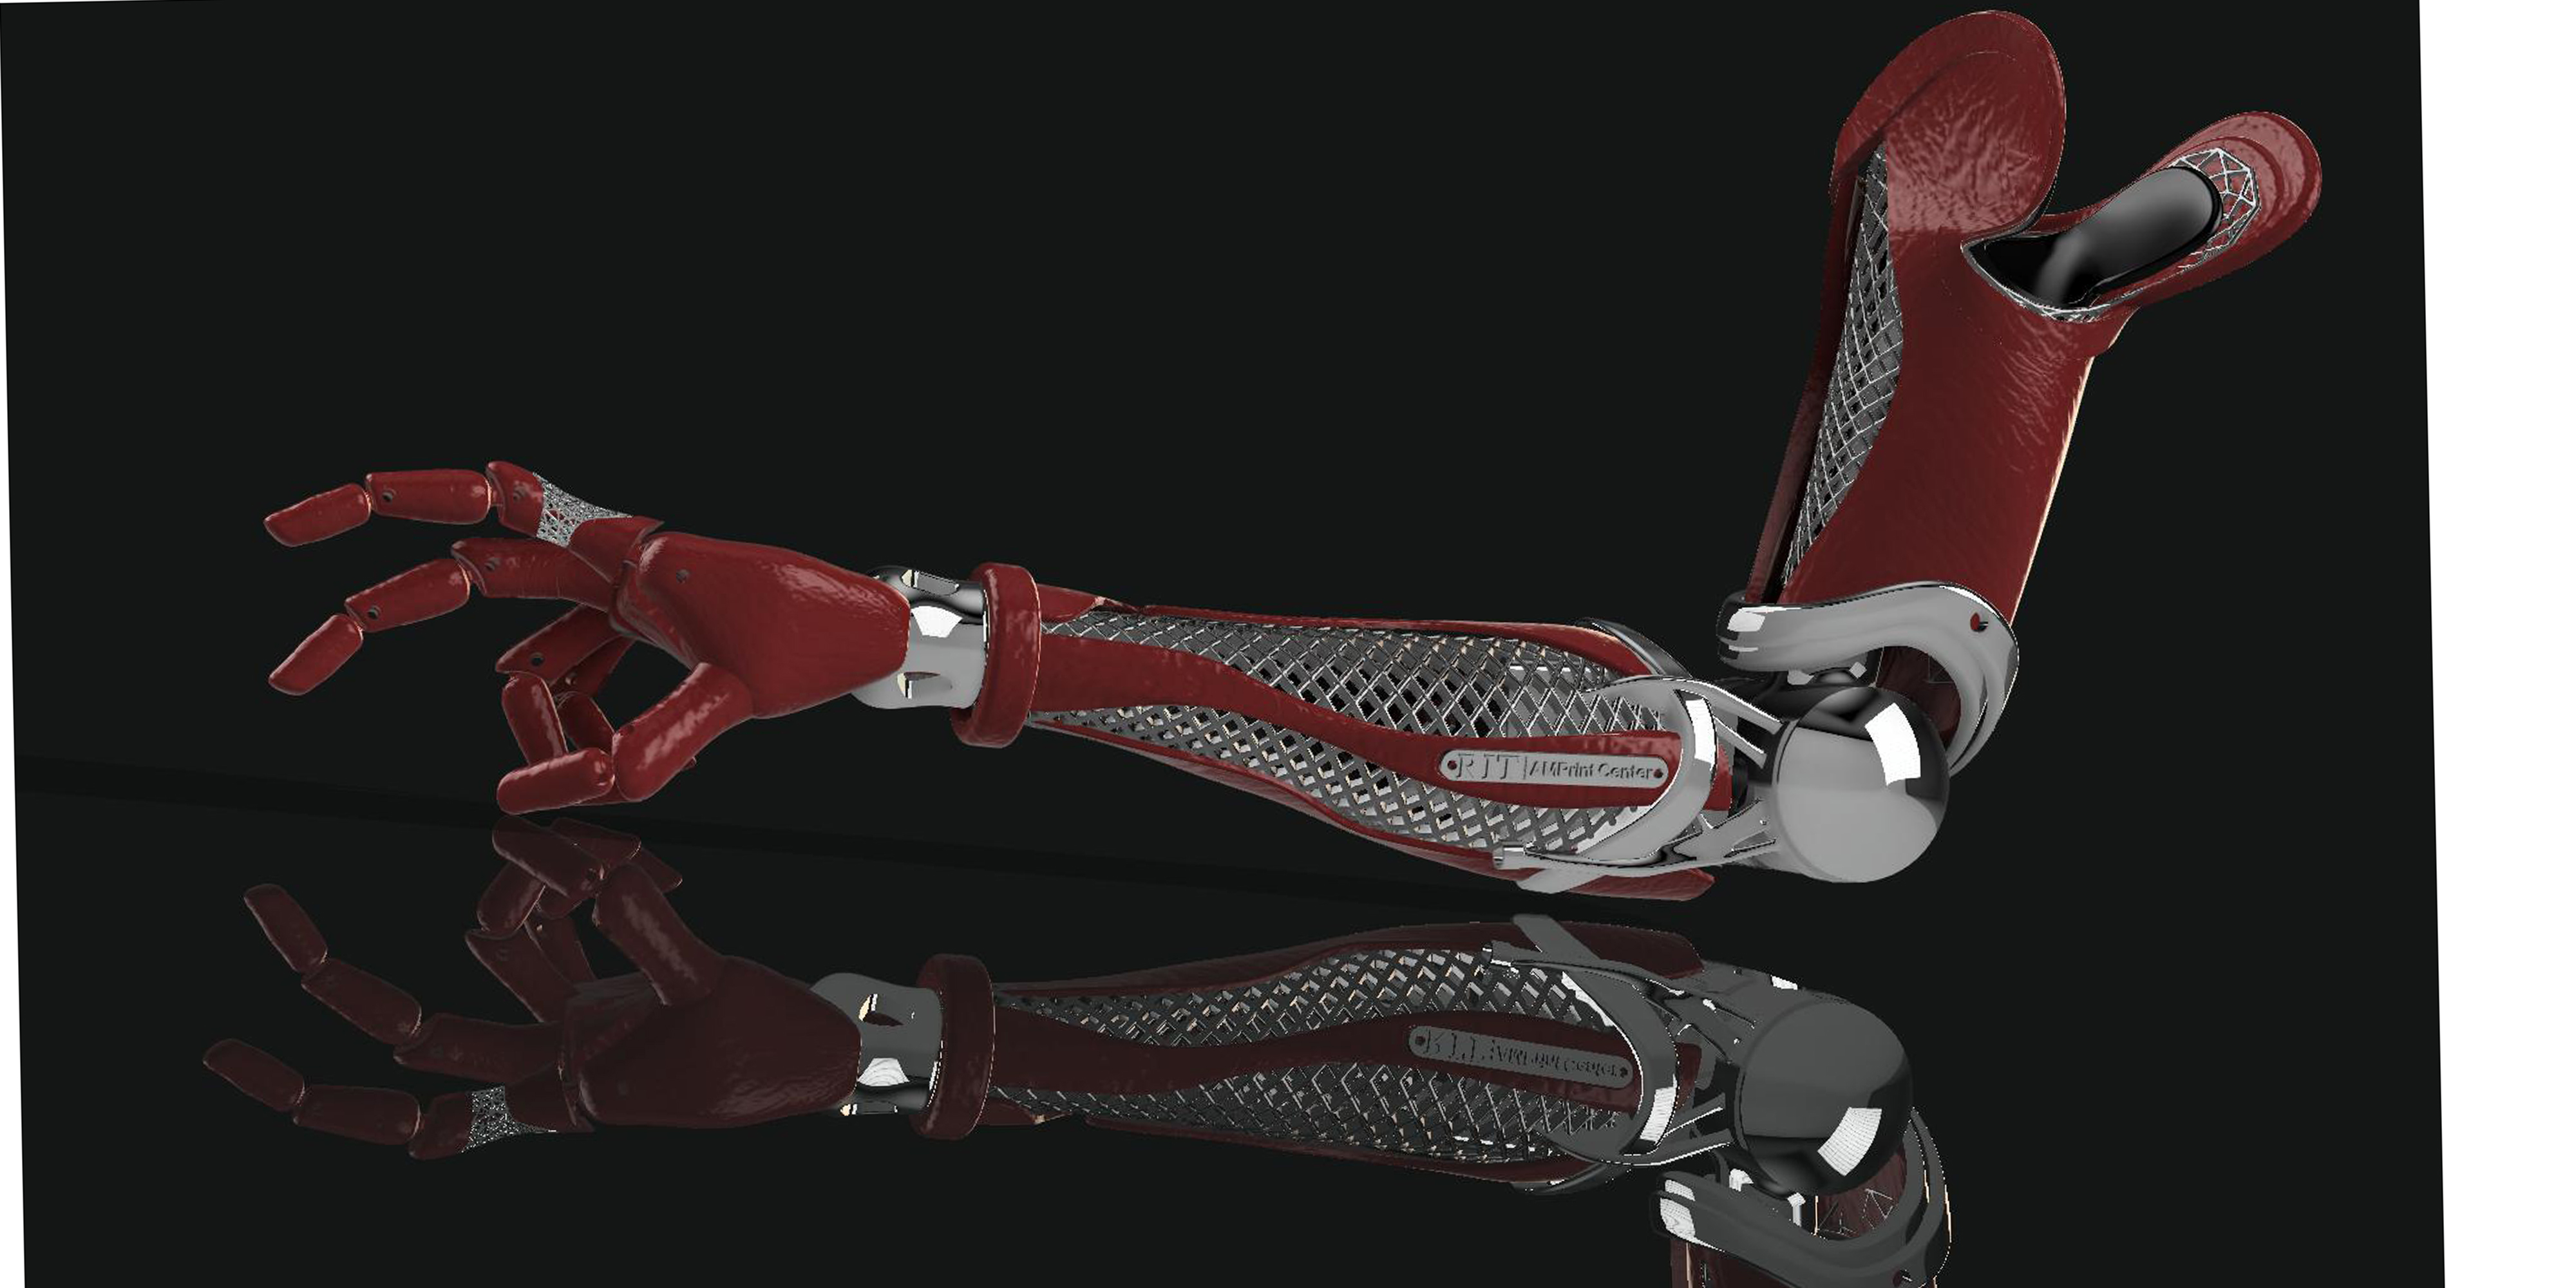 Rendering of prosthetic arm with a chrome and red colors.